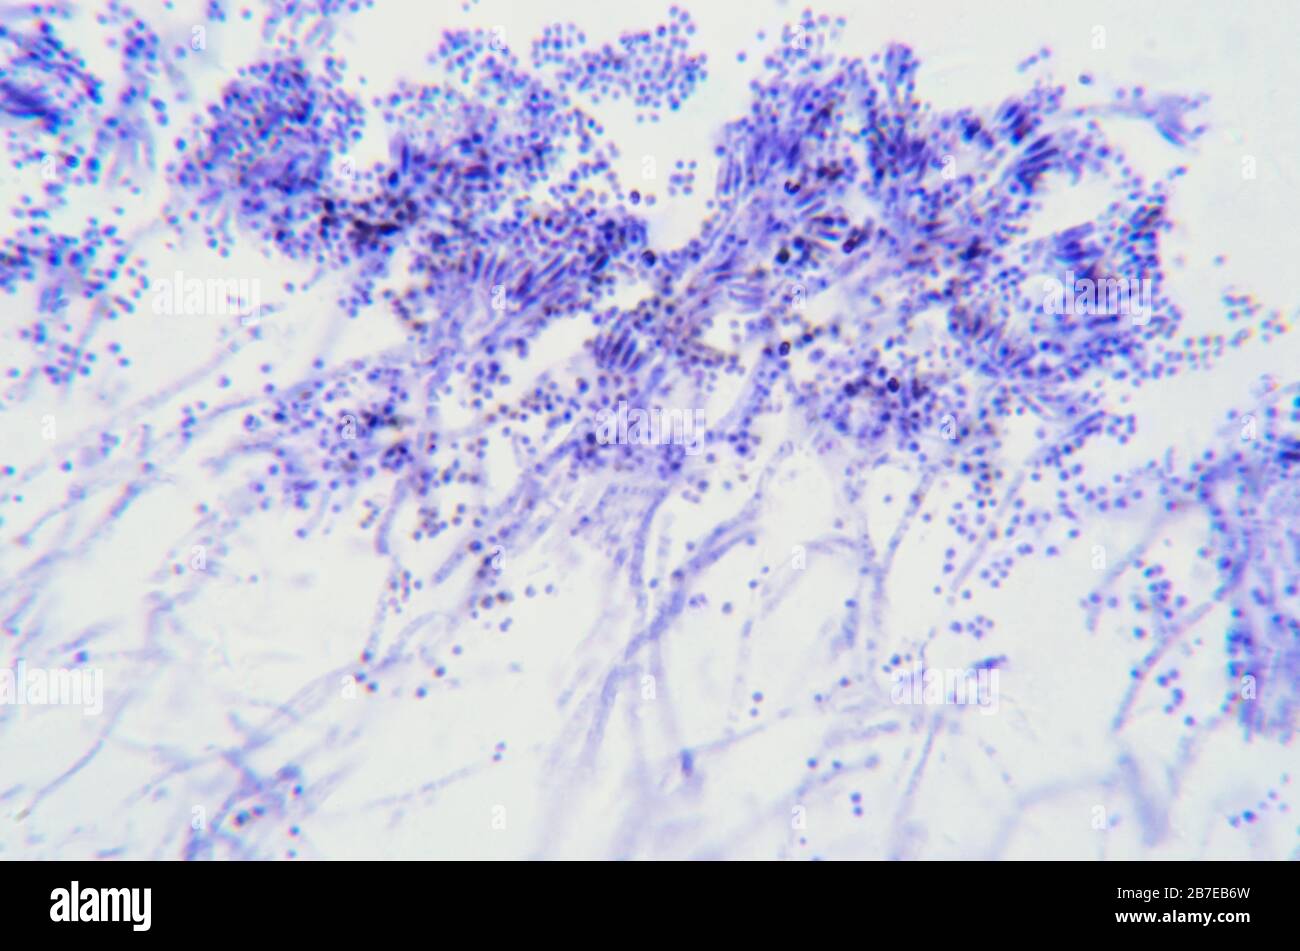 Penicillium branches, ascomycetous fungi under the microscope. To humans ascomycetes are a source of medicinal compounds, like antibiotics. Stock Photo